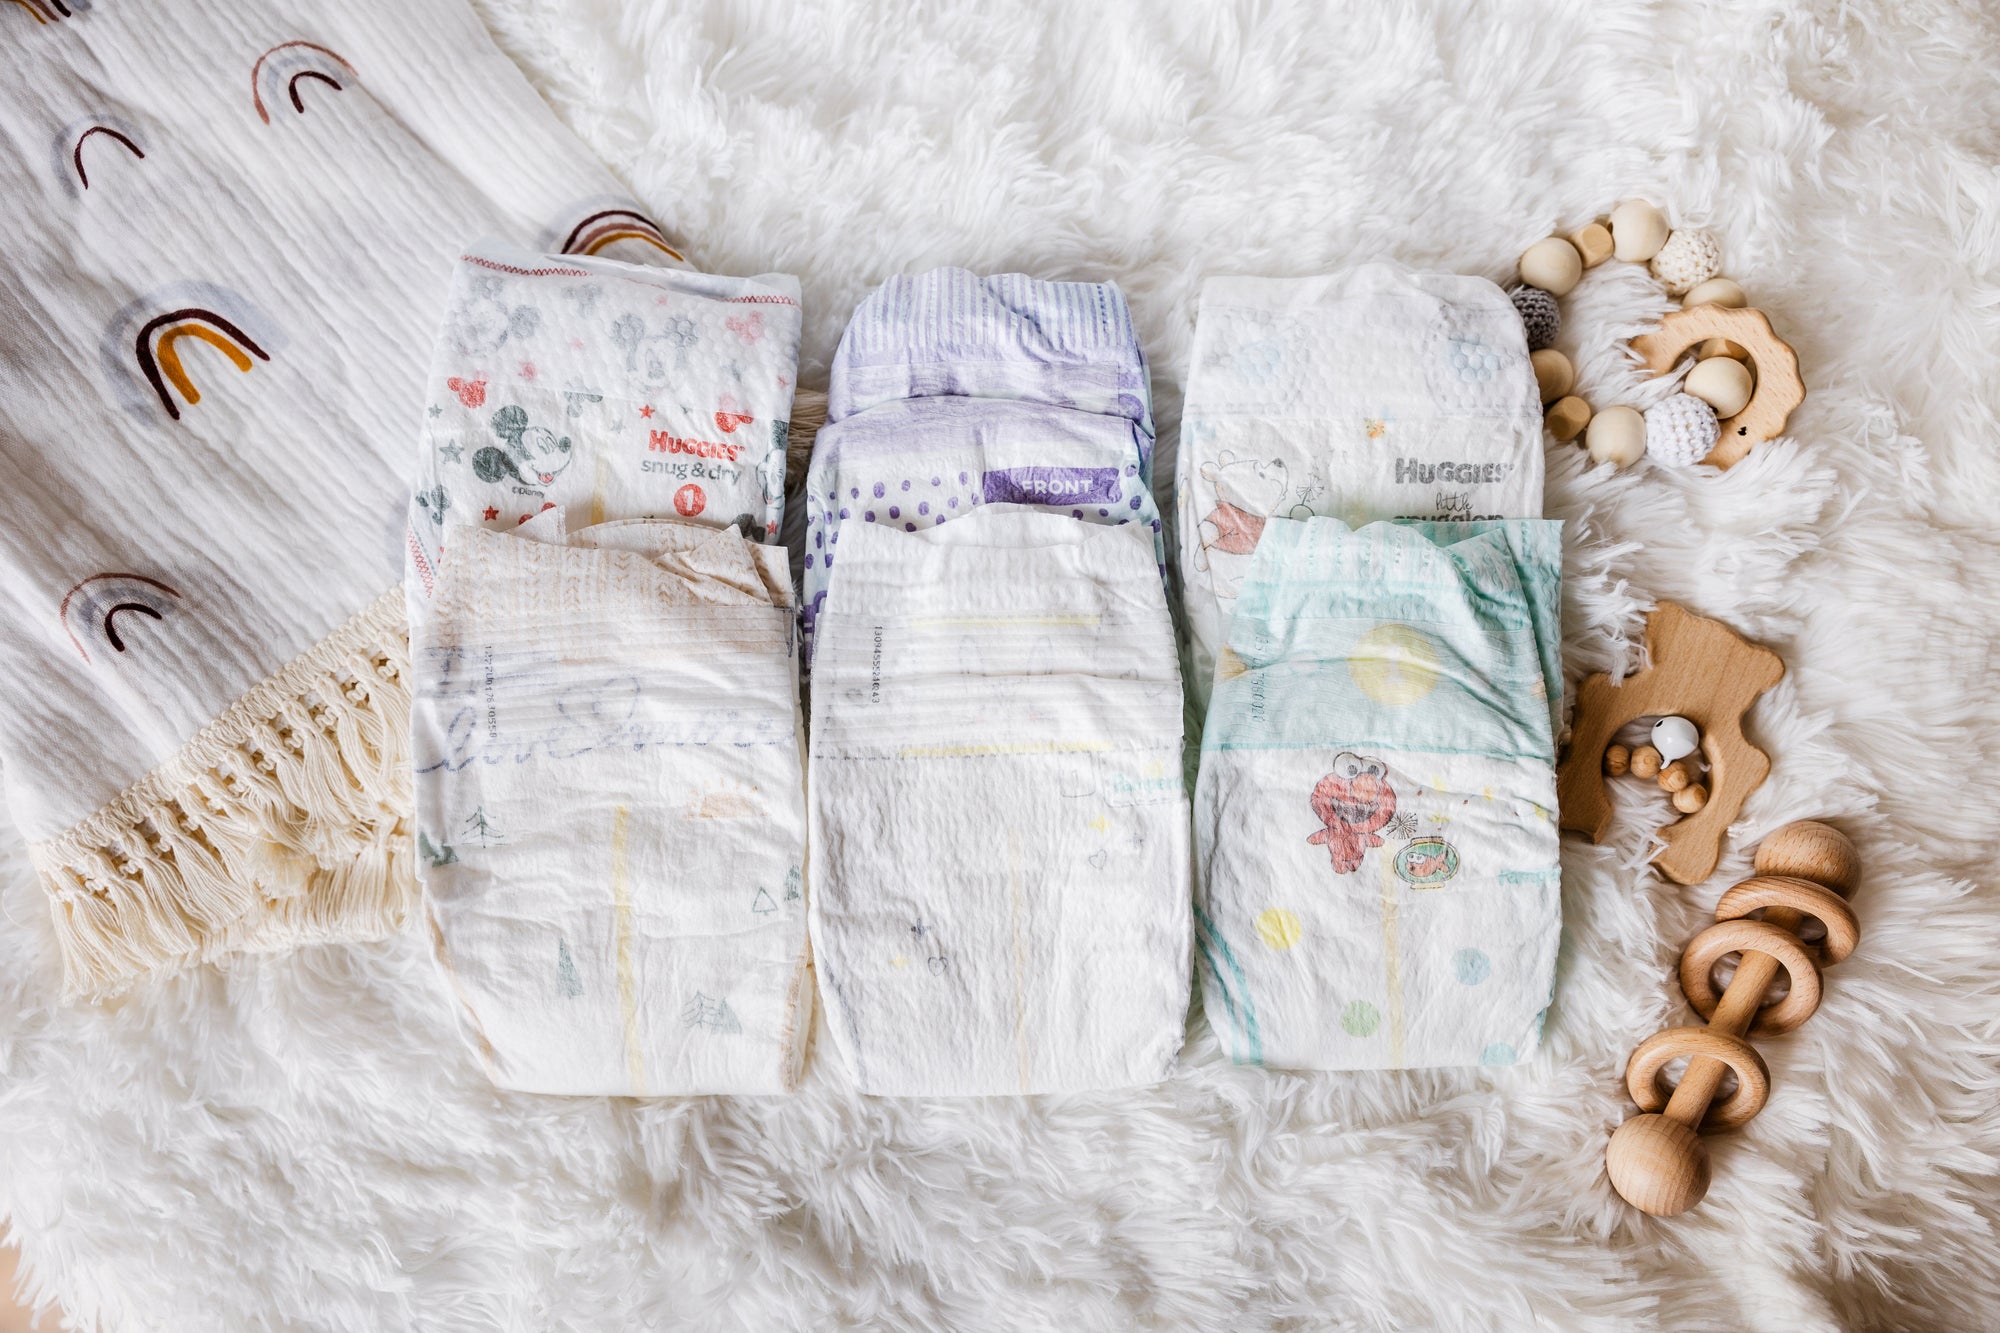 Mommy Mainstream Diaper Sampler Package: 6 Diaper Sample Packs of name brand diapers including Huggies Little Snugglers, Pampers Swaddlers, Huggies Snug & Dry, Pampers Baby Dry, Pampers Pure Protection, and Luvs